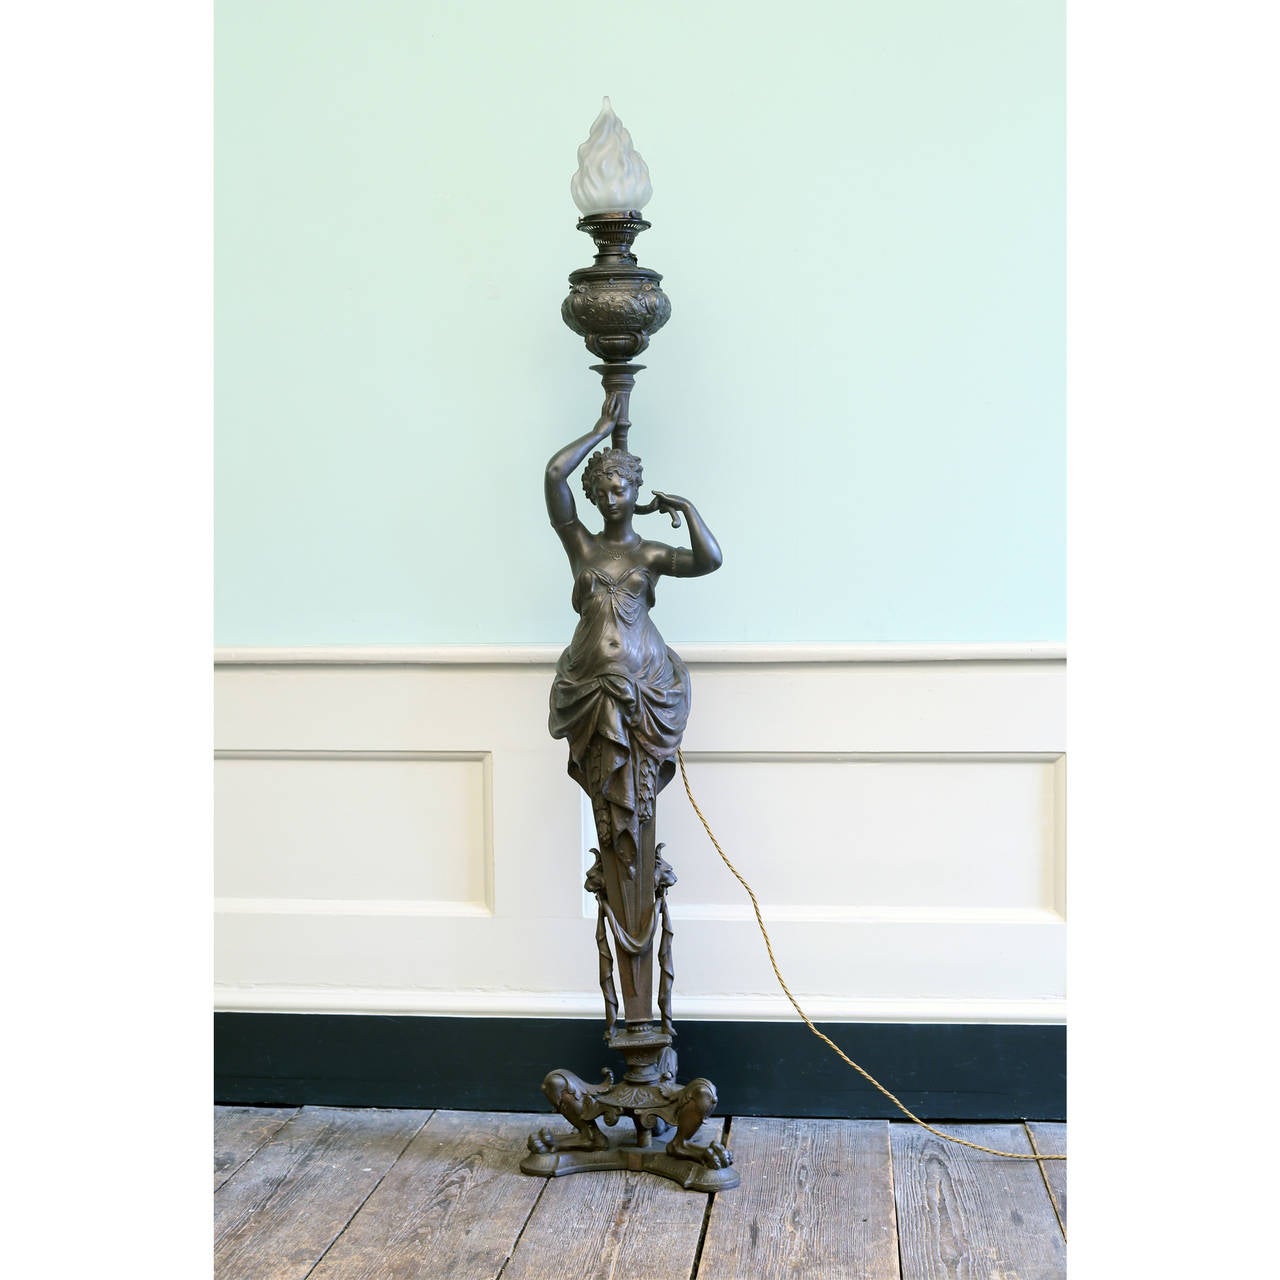 A French Spelter floor lamp, late 19th century, modelled as a robed female on zoomorphic triform base, topped with flambeaux shade. Converted to electricity from oil. 

Available to view at Brunswick House, London.

Height 163cm, width 34cm.